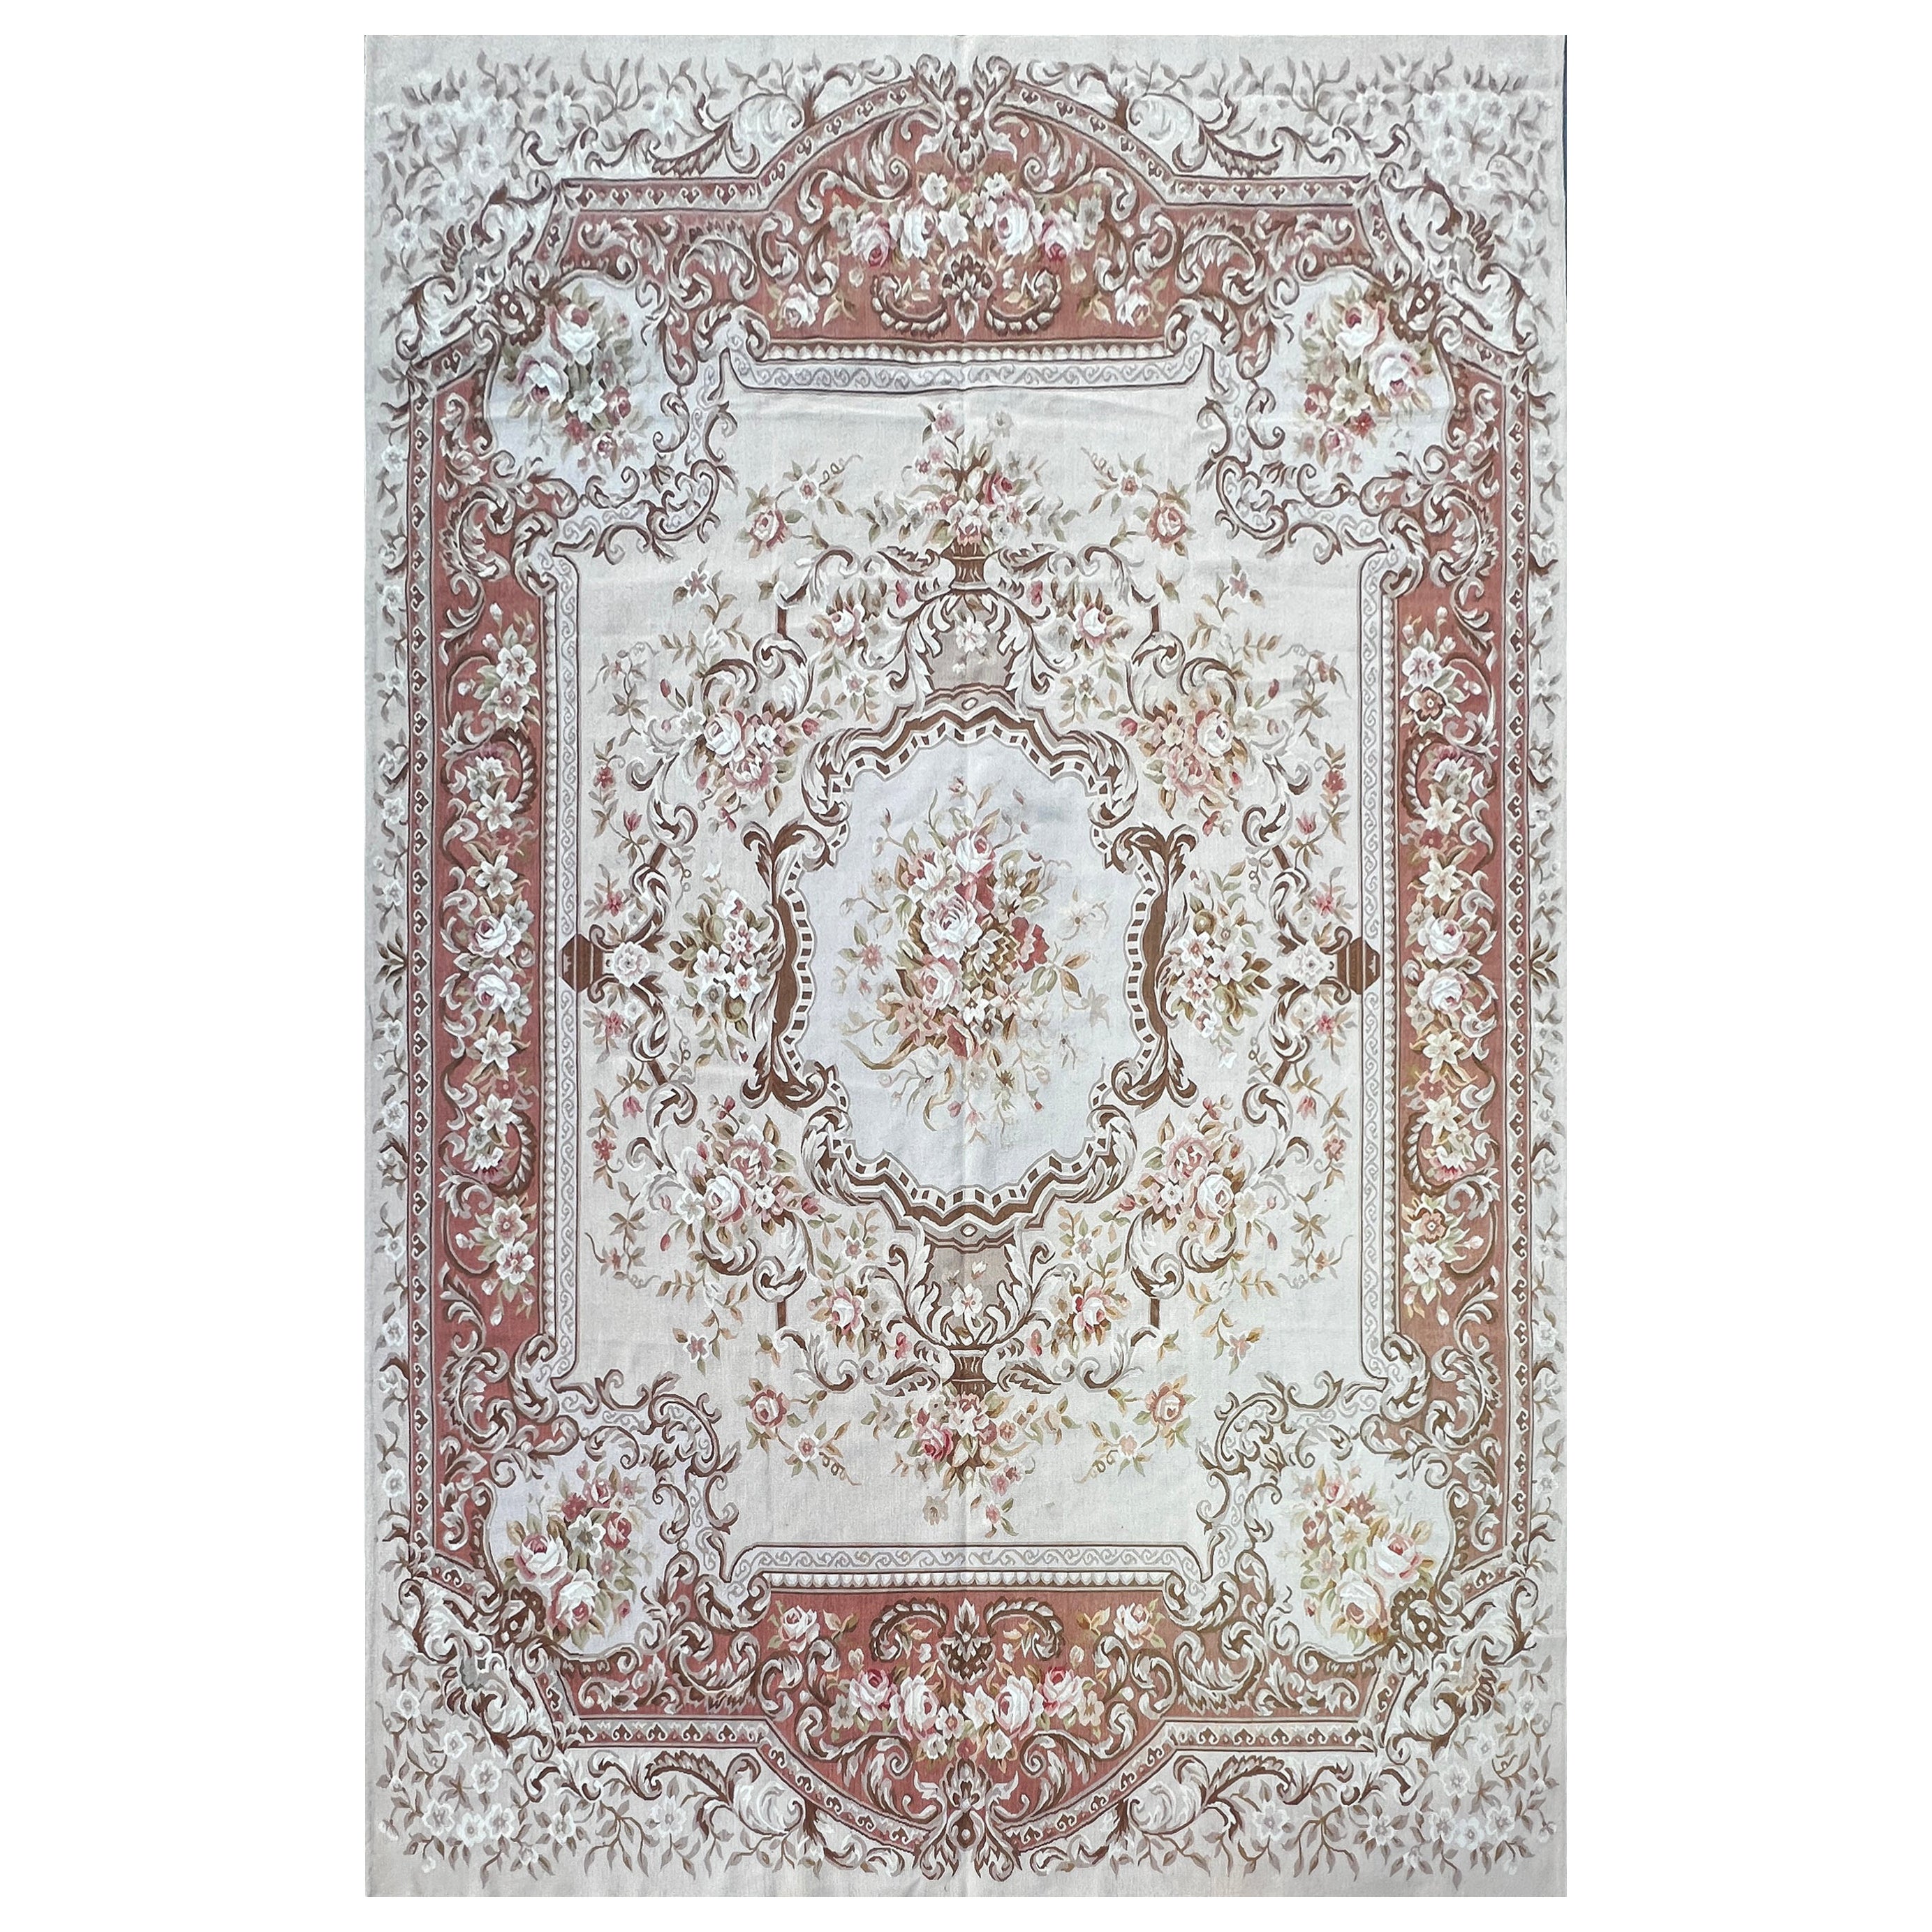 Very Beautiful Carpet Aubusson 20th Century Around 1980, N ° 1203 For Sale